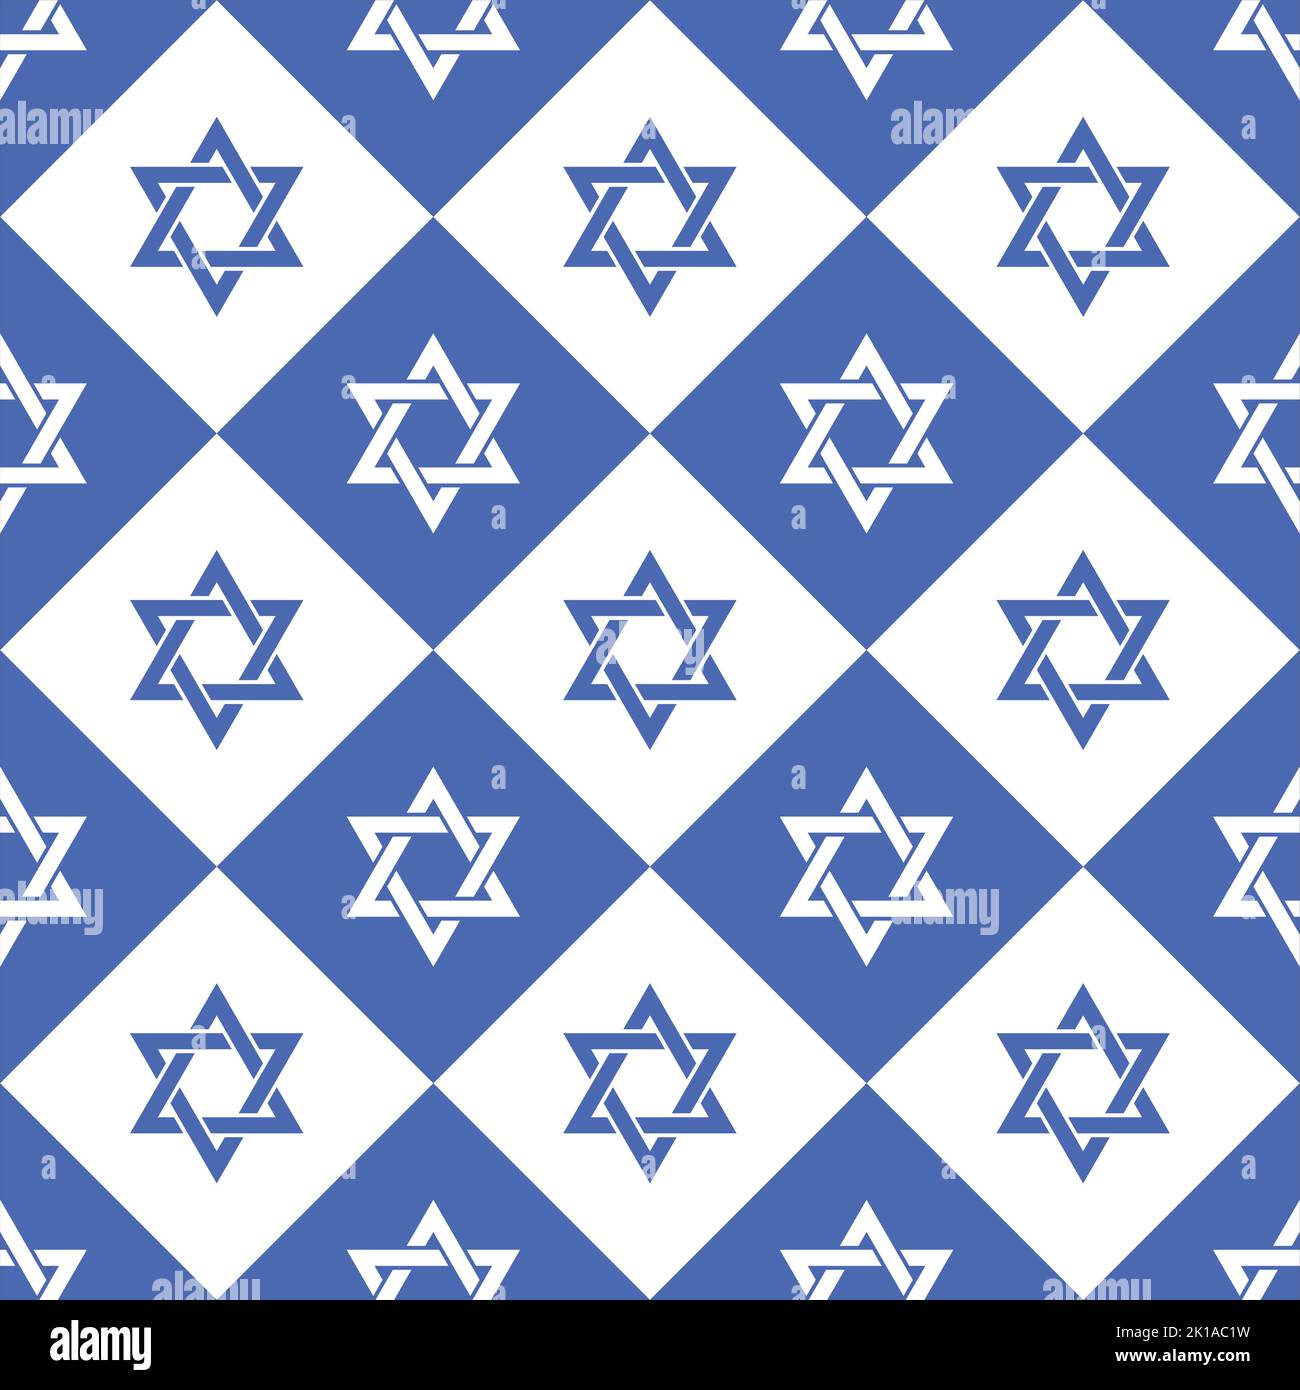 Stars and diagonal squares seamless pattern. The Star of David is an ancient Jewish symbol in the form of a hexagram.  State symbol of Israel. Stock Vector